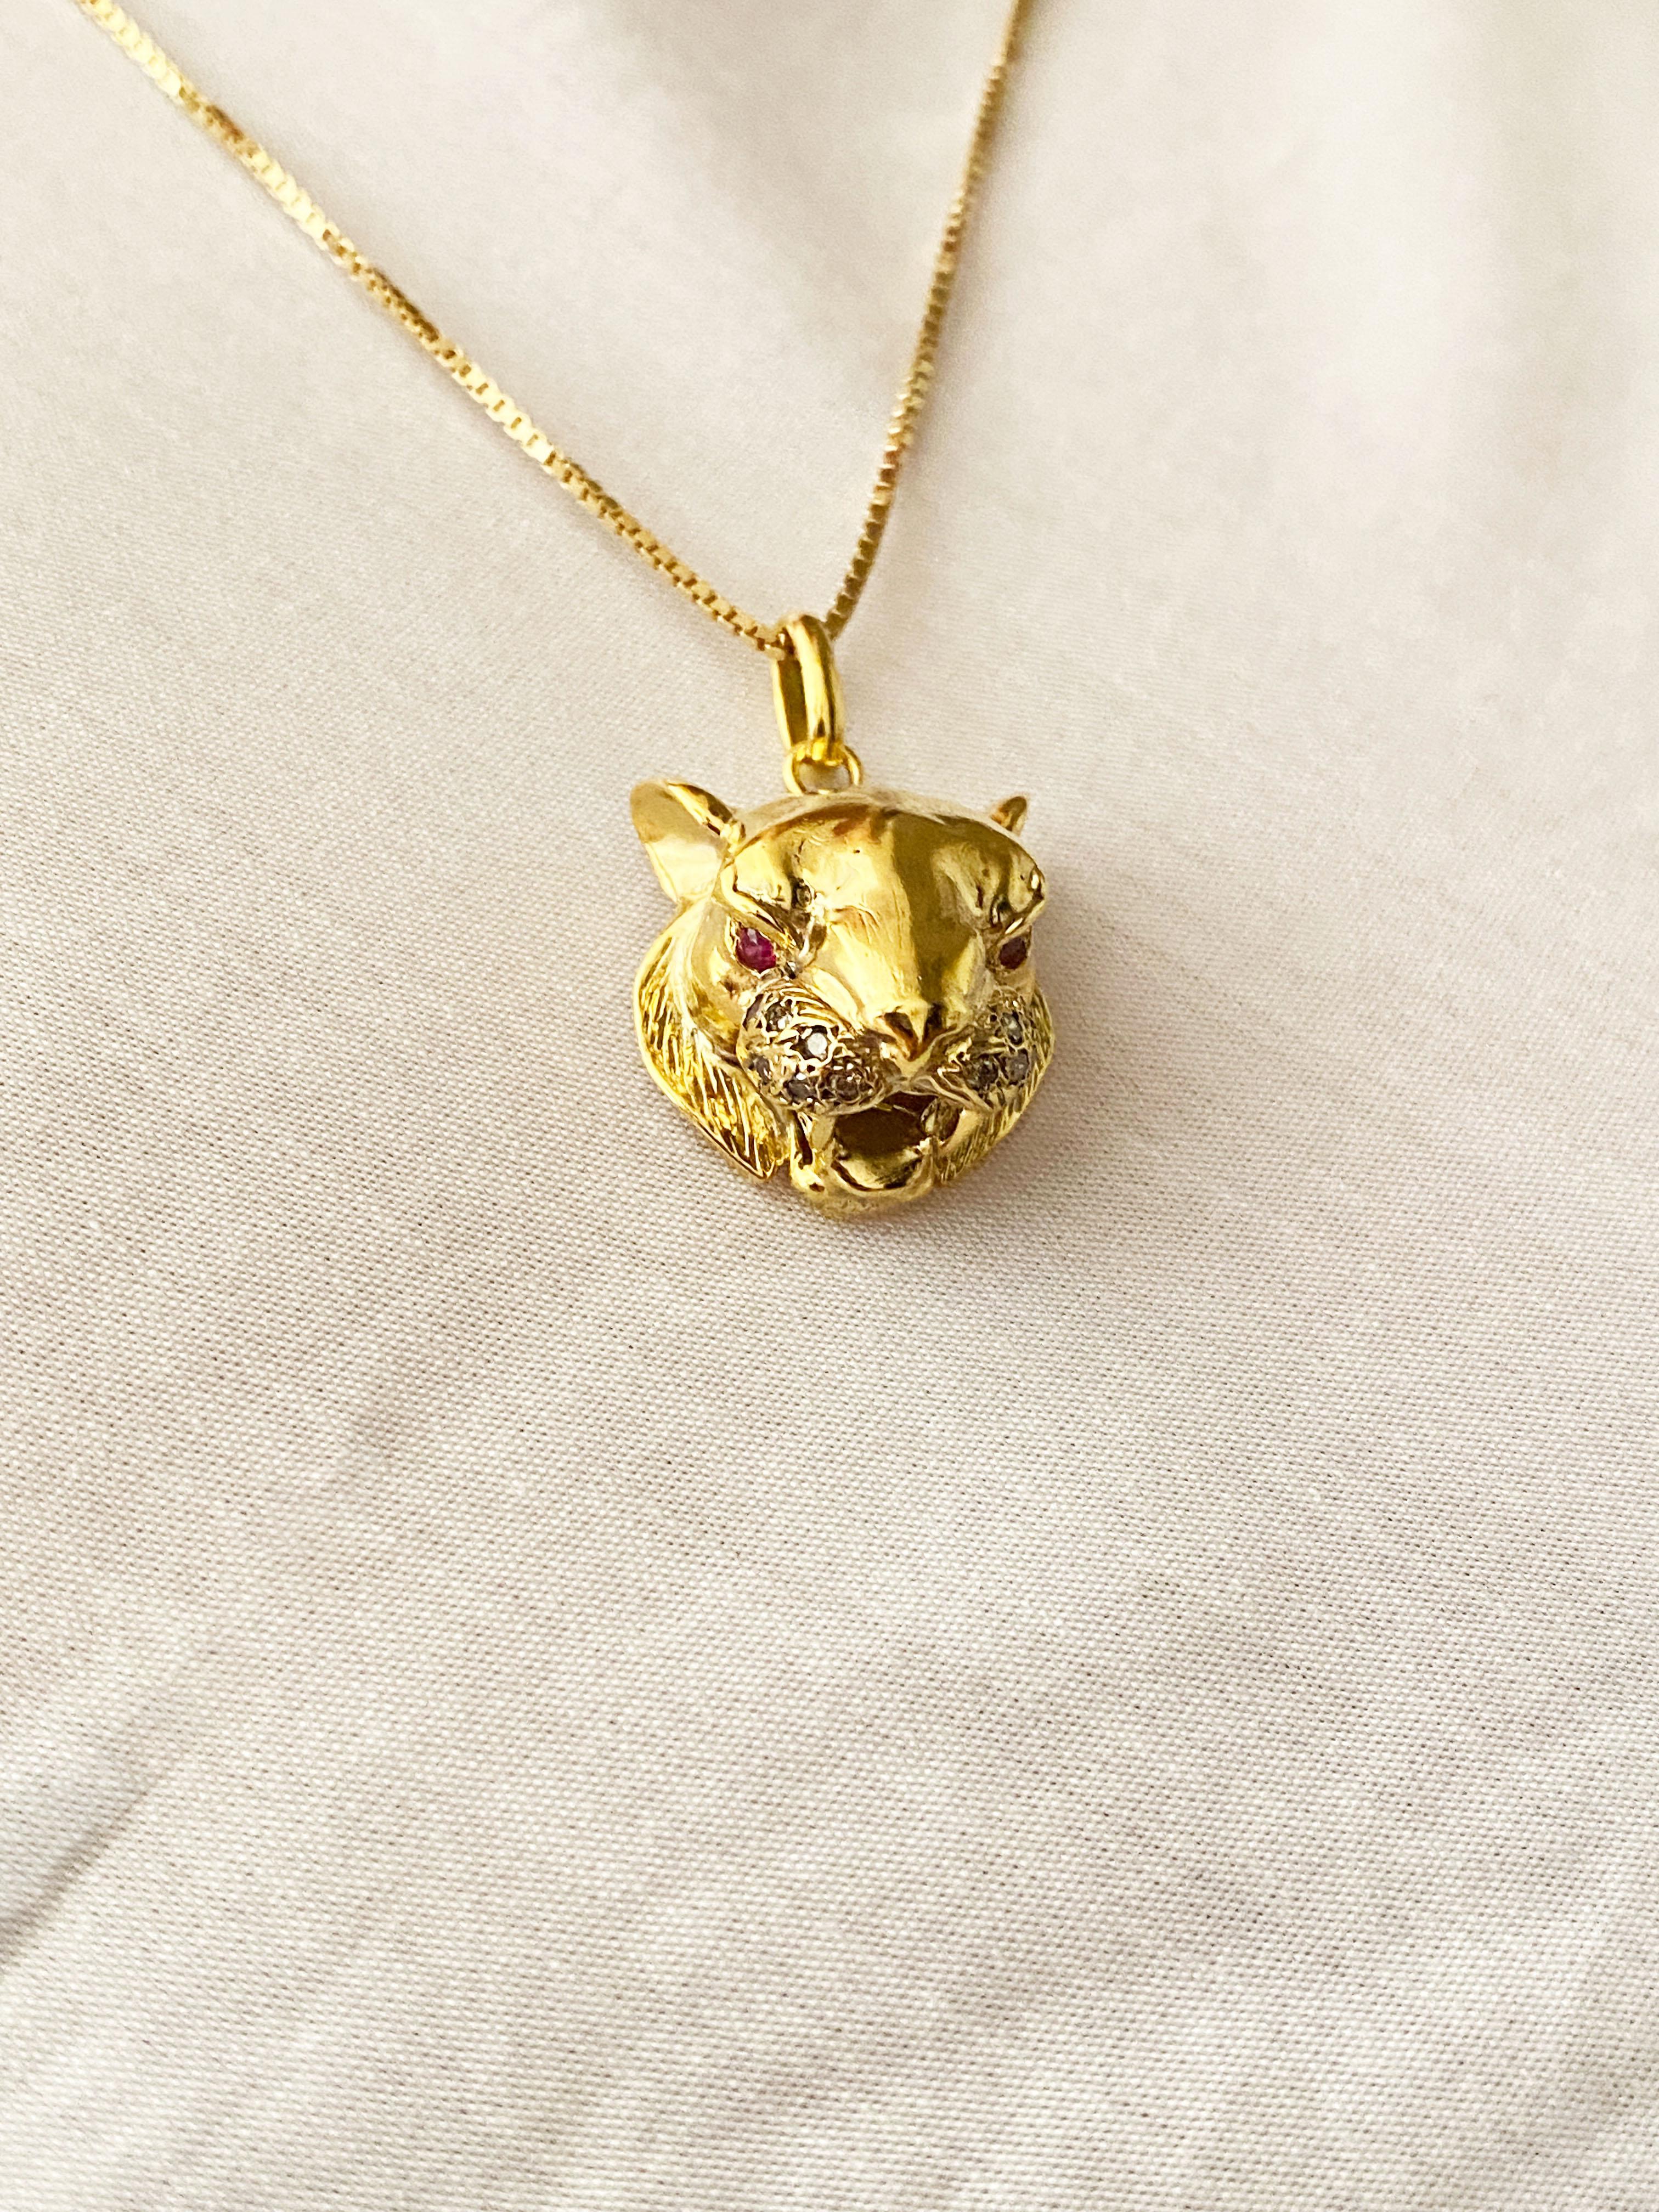 Introducing the highly sought-after Rossella Ugolini handcrafted unisex unique tiger pendant, a true masterpiece of artistry and luxury. This exceptional pendant is crafted from 18K yellow gold, meticulously sculpted by skilled artisans in Italy